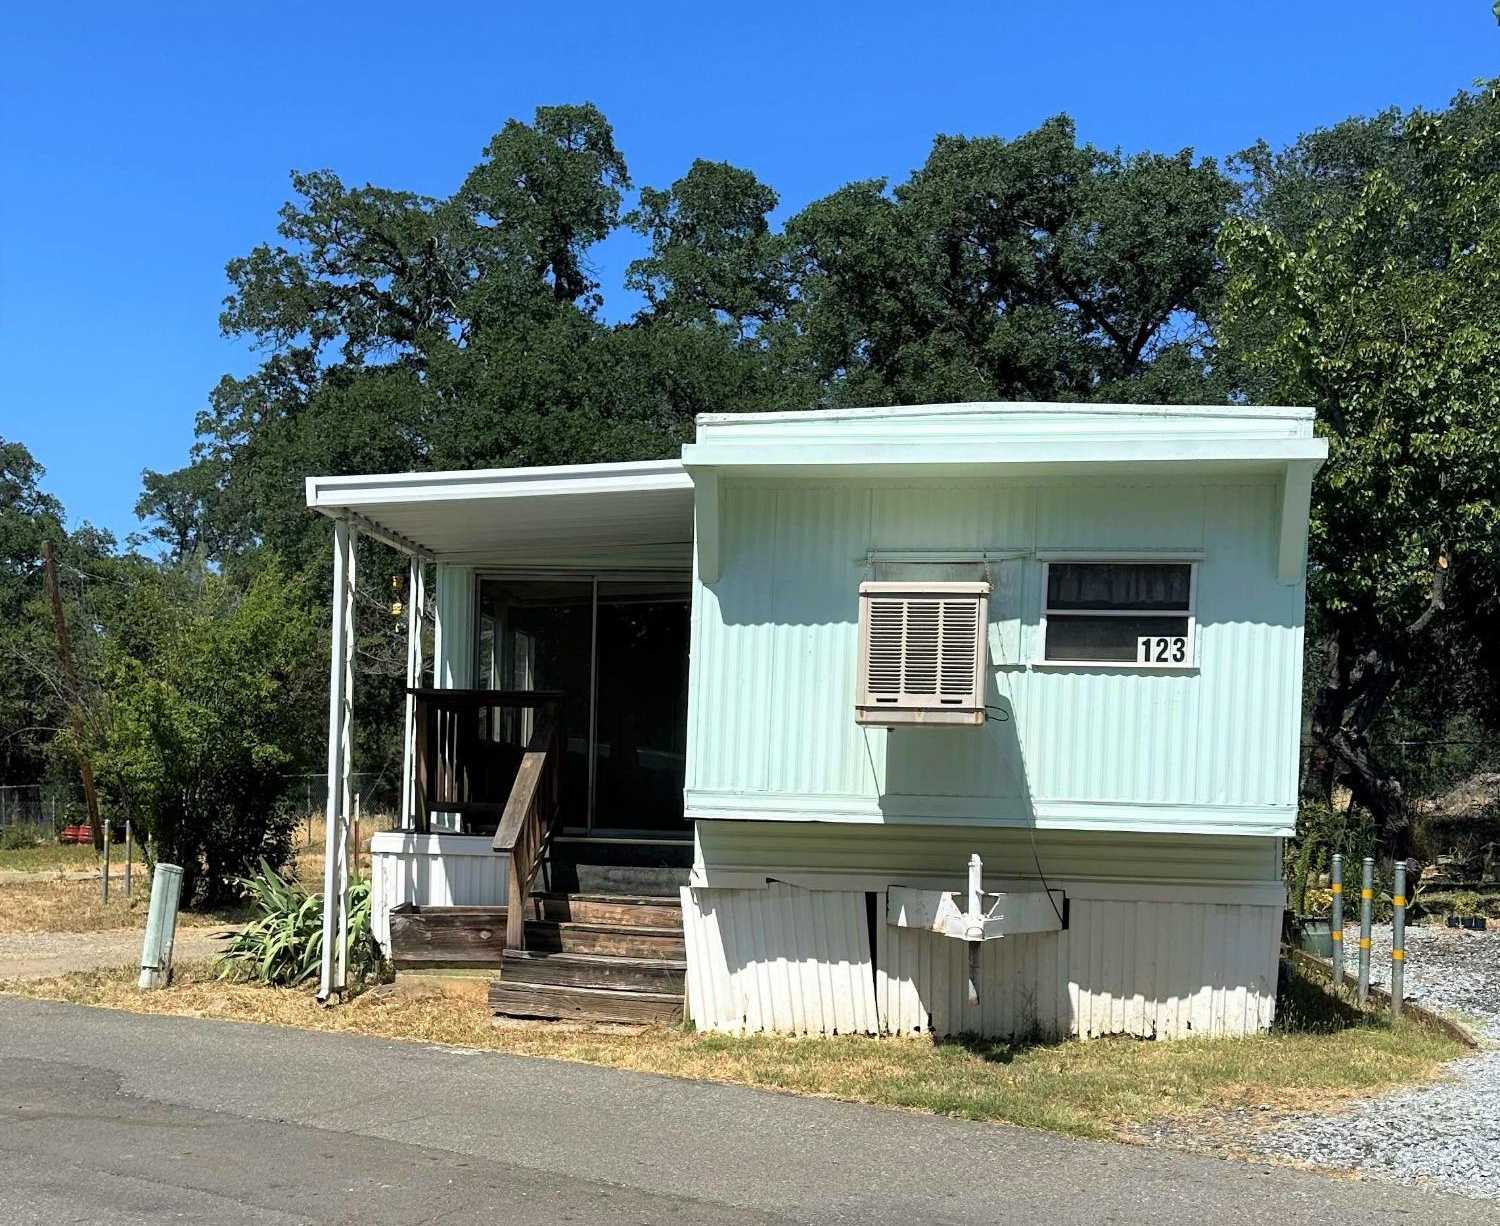 $10,995 - 2Br/1Ba -  for Sale in Oroville